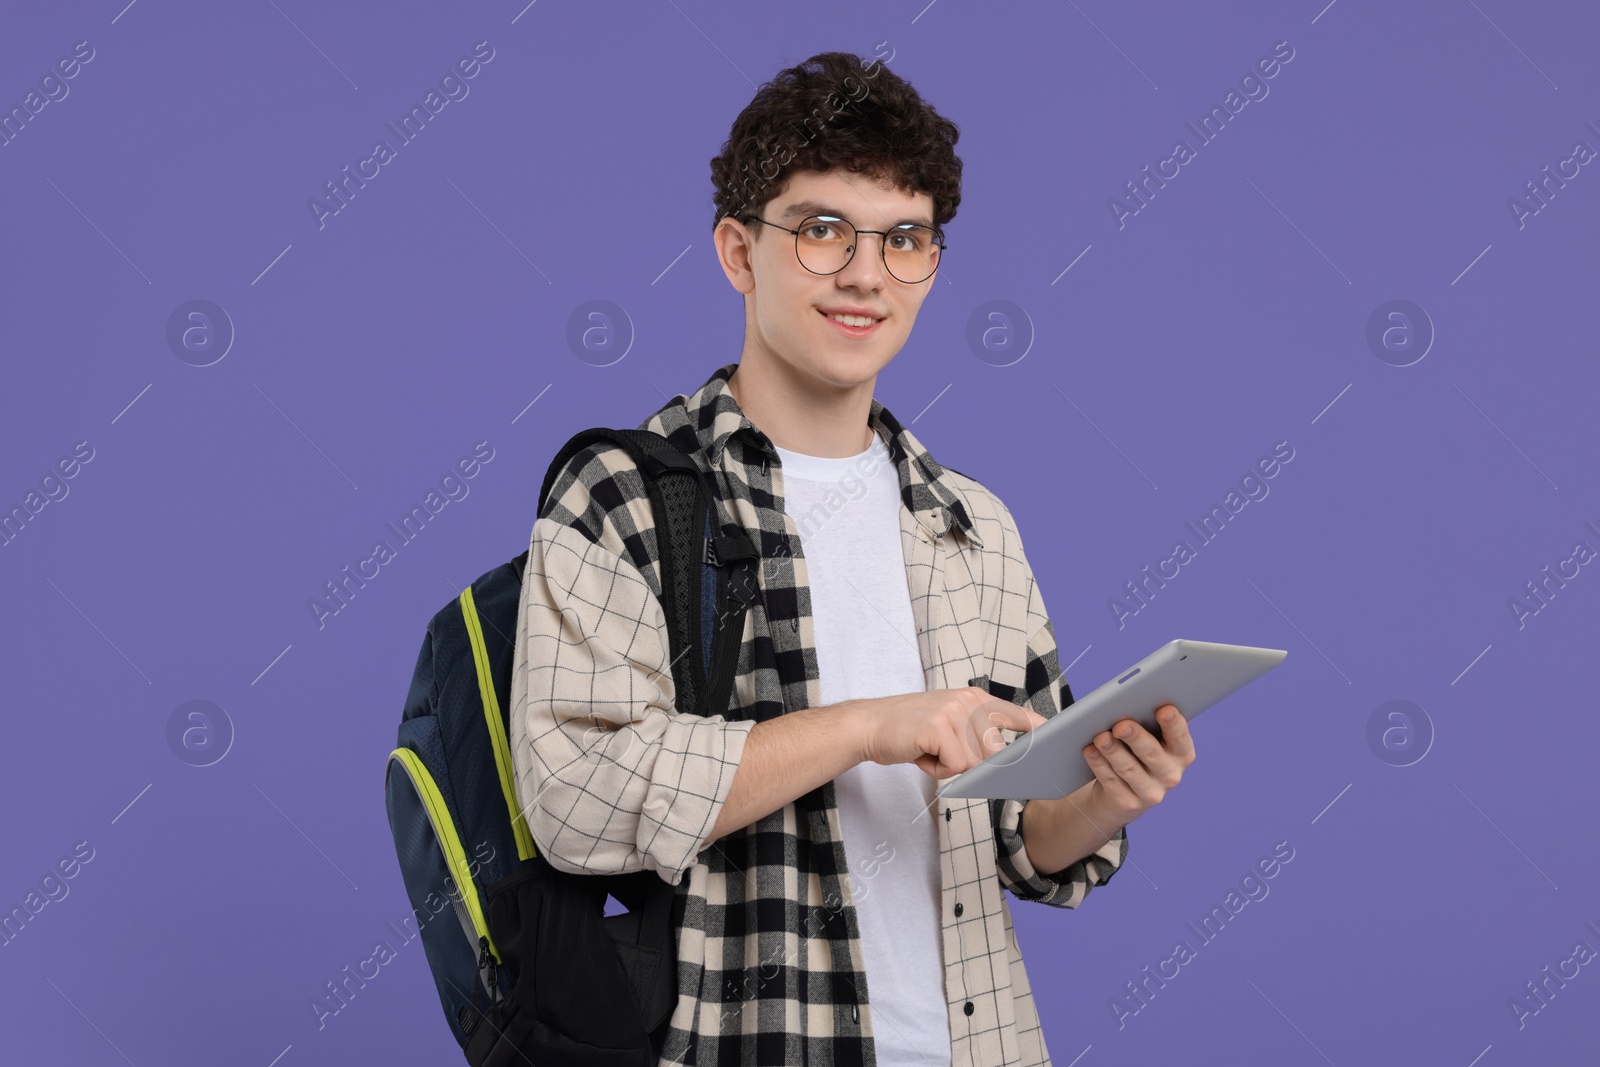 Photo of Portrait of student with backpack and tablet on purple background